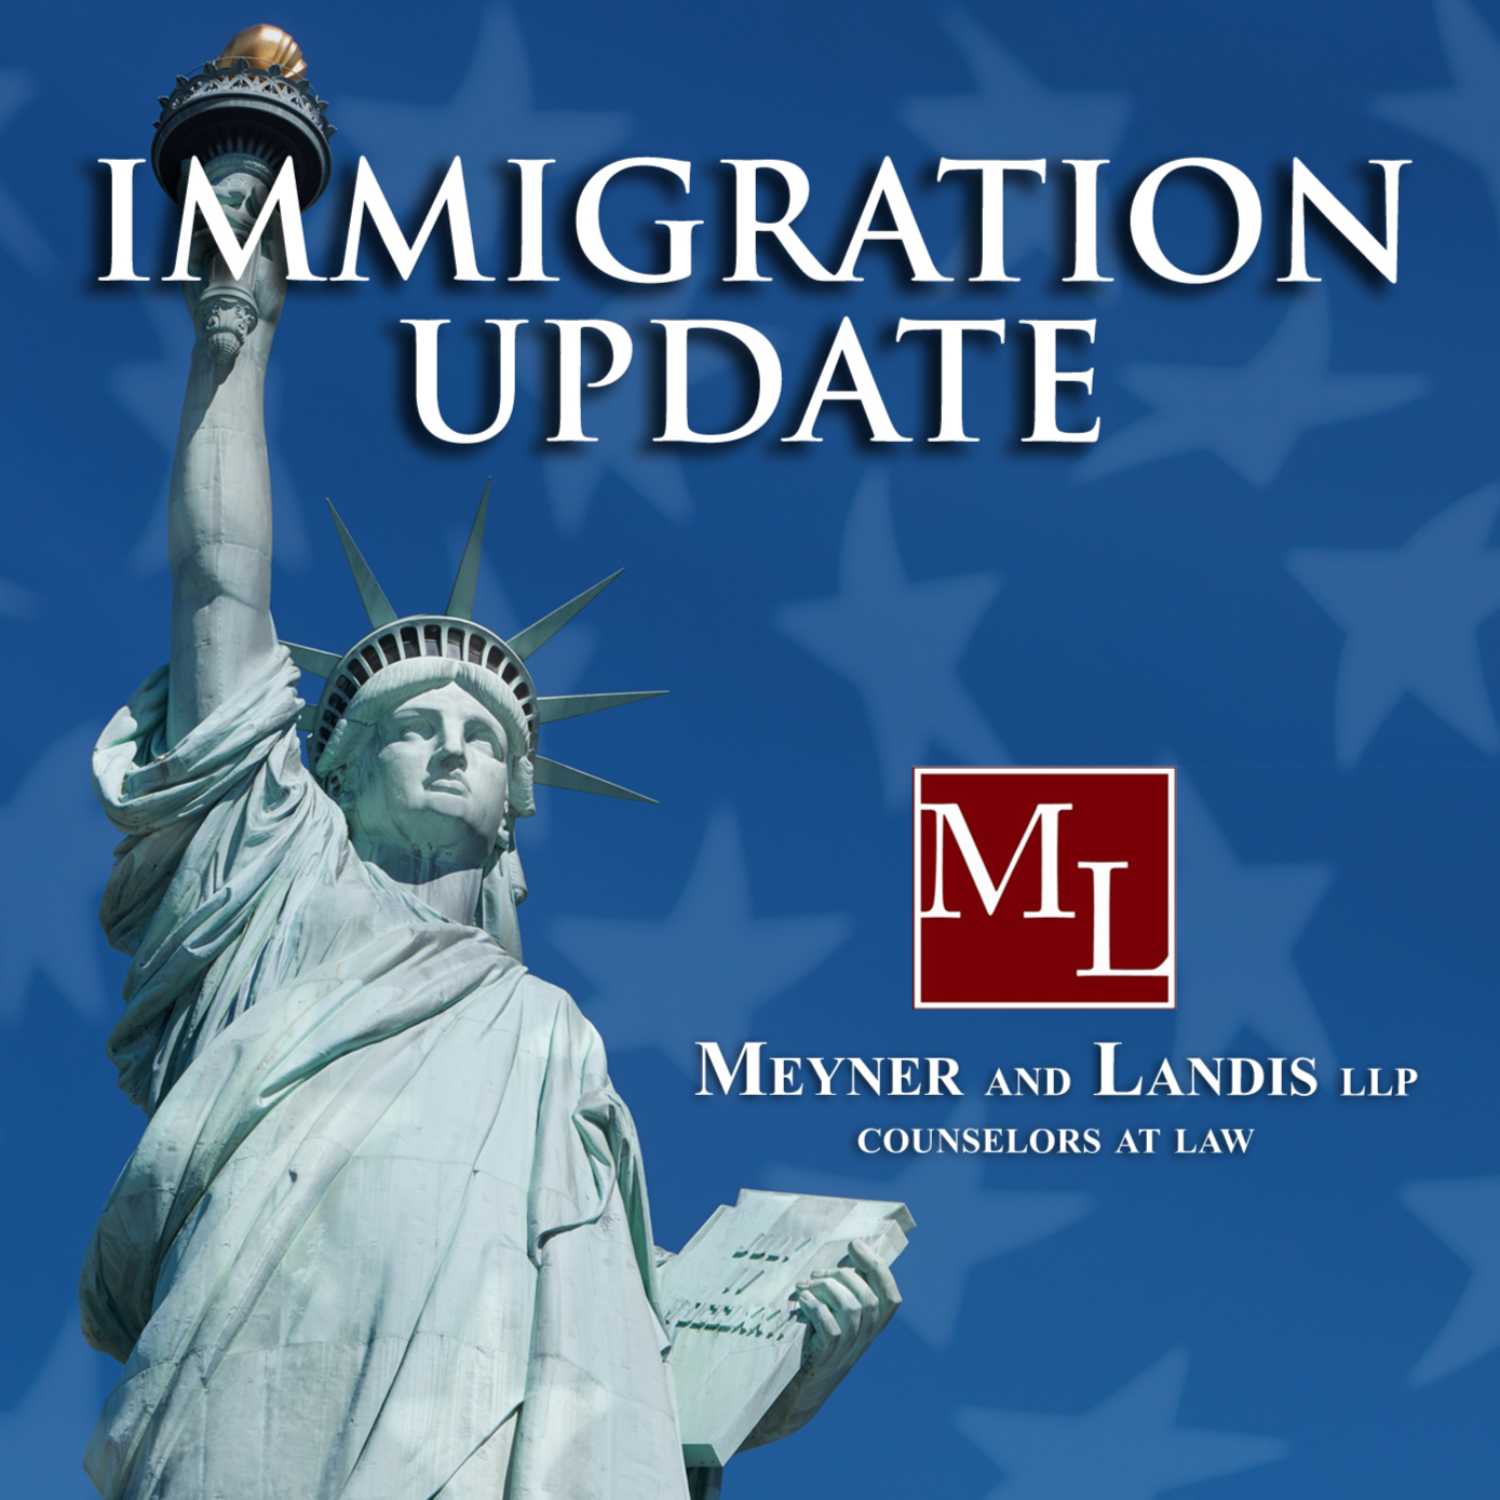 Feb 8, 2021: H-1B Registration Tips for Fiscal Year 2022